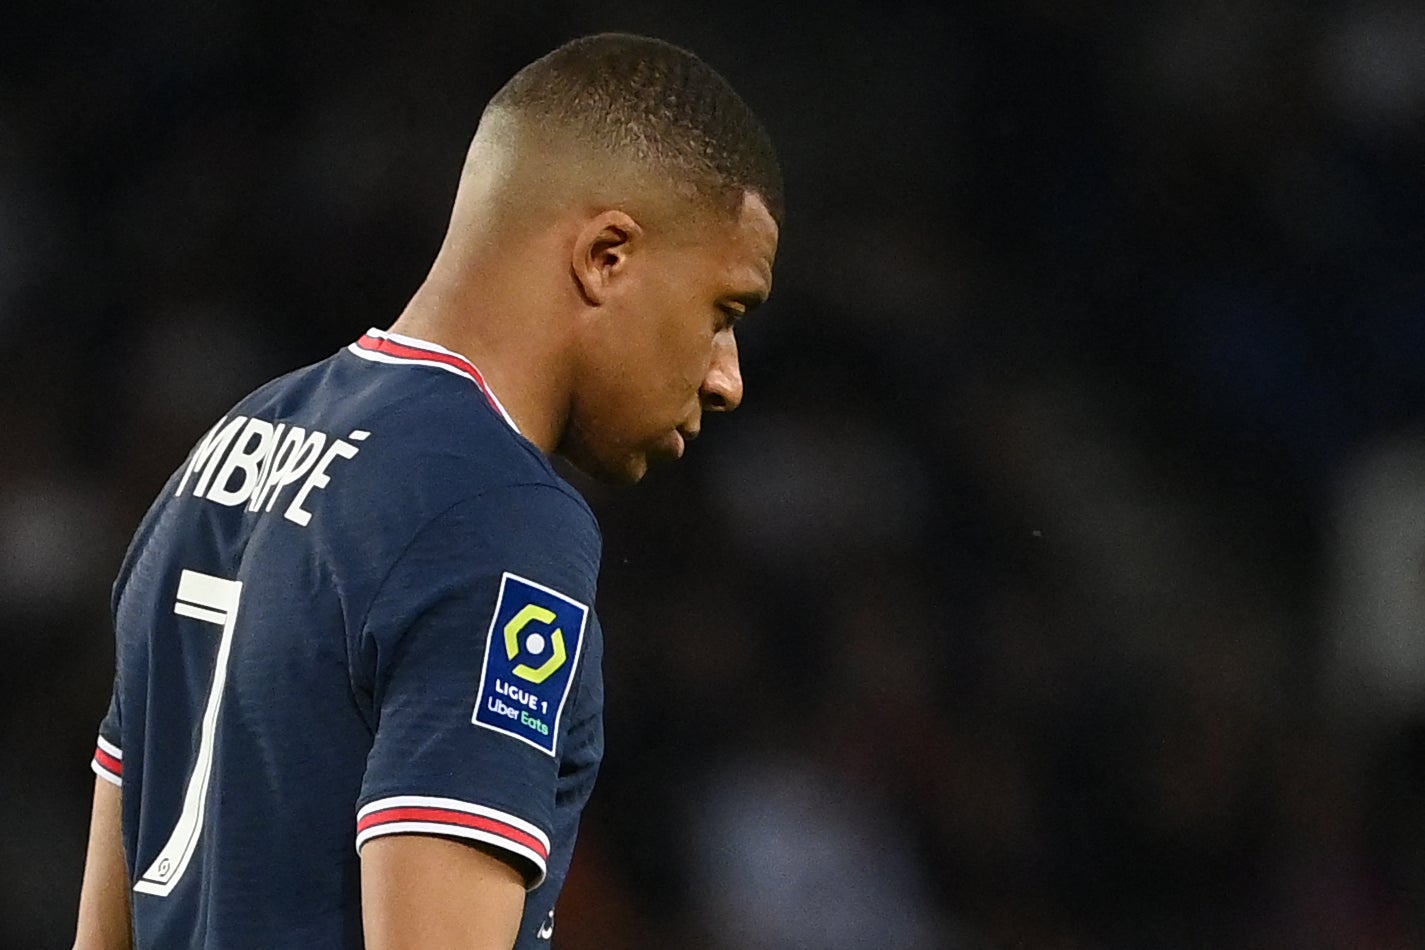 Kyalian Mbappe is set to become the highest-paid player in world football.